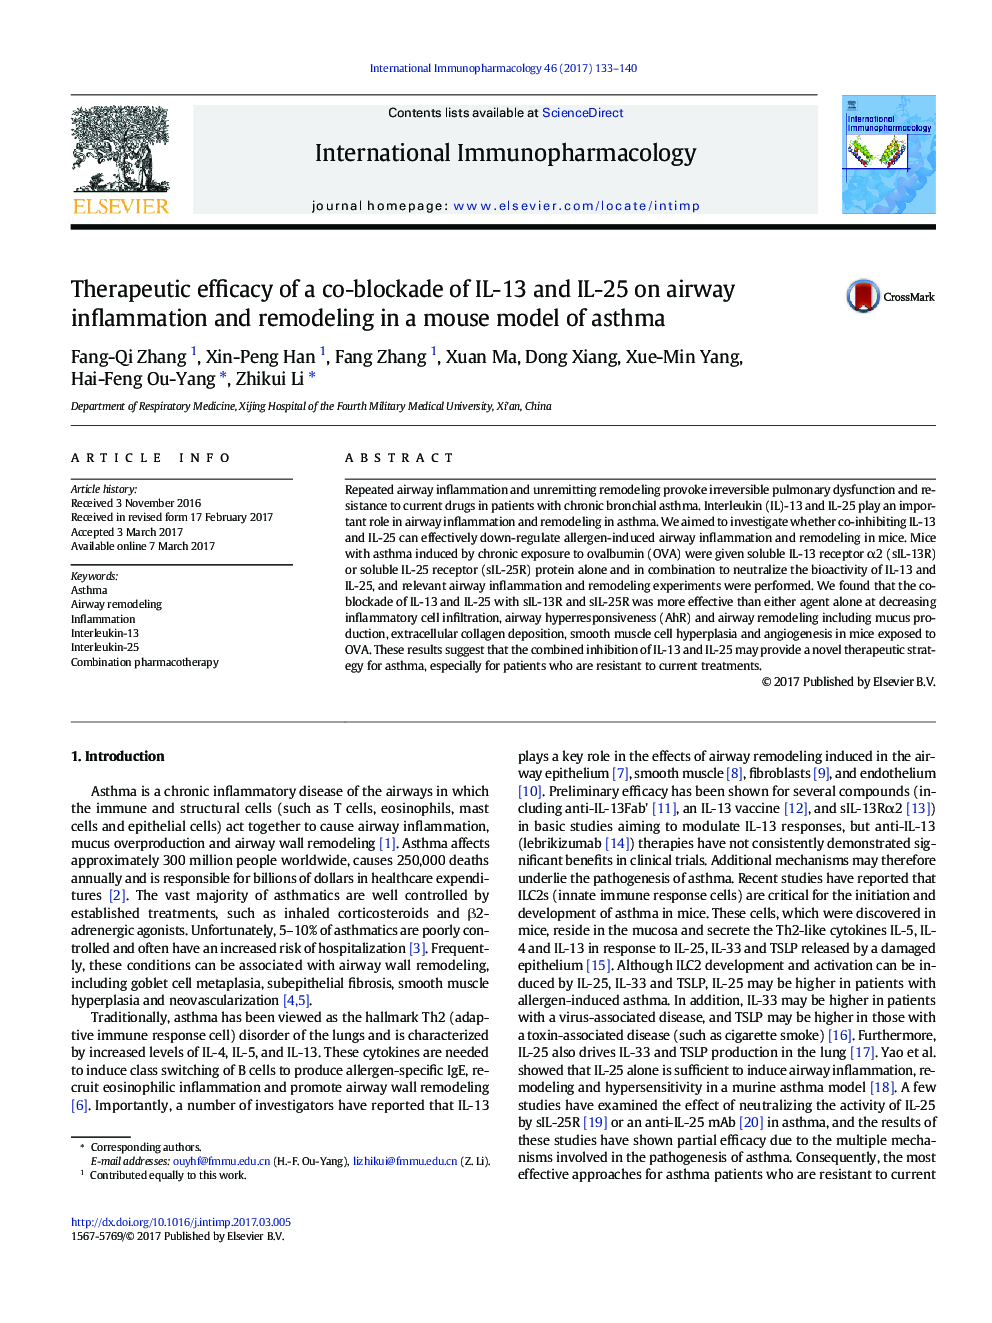 Therapeutic efficacy of a co-blockade of IL-13 and IL-25 on airway inflammation and remodeling in a mouse model of asthma